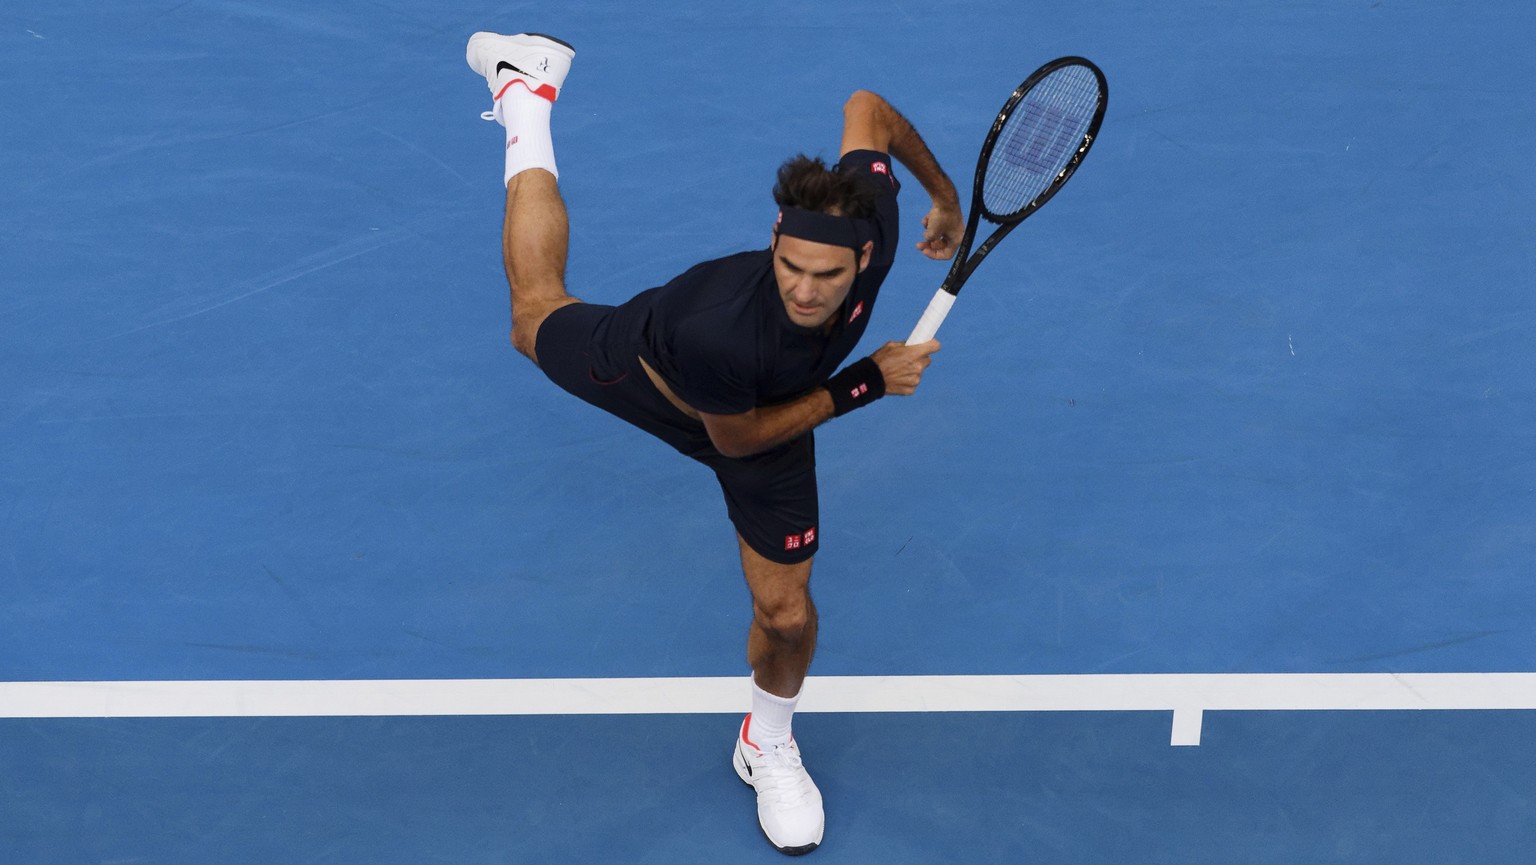 Switzerland&#039;s Roger Federer plays a shot during his match against at Frances Tiafoe of the United States at the Hopman Cup in Perth, Australia, Tuesday, Jan. 1, 2019. (AP Photo/Trevor Collens)